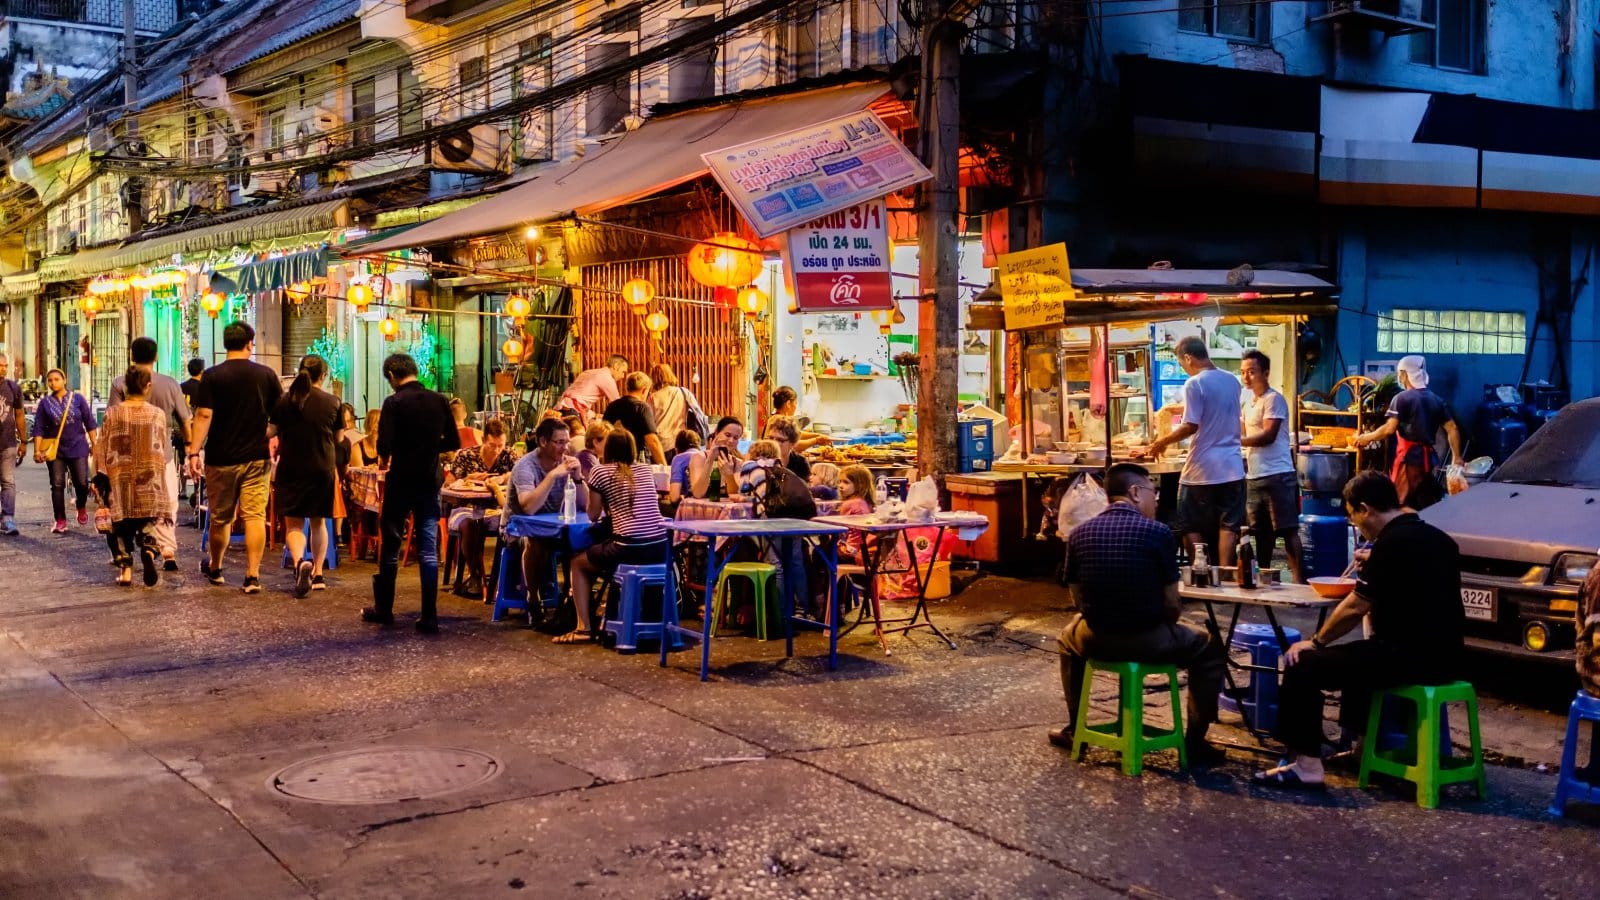 <p class="wp-caption-text">Image Credit: Shutterstock / MC_Noppadol</p>  <p><span>Bangkok’s street food scene is bursting with flavors and aromas, offering an authentic taste of Thai cuisine. The city’s street food markets are a culinary adventure, from sizzling pad Thai to aromatic bowls of boat noodles. One of the best places to indulge in these delights is at a local market, where you can sample many different dishes. The experience is not just about the food but also about the hustle and bustle atmosphere, where chefs masterfully prepare meals over open flames, and locals haggle over prices.</span></p>